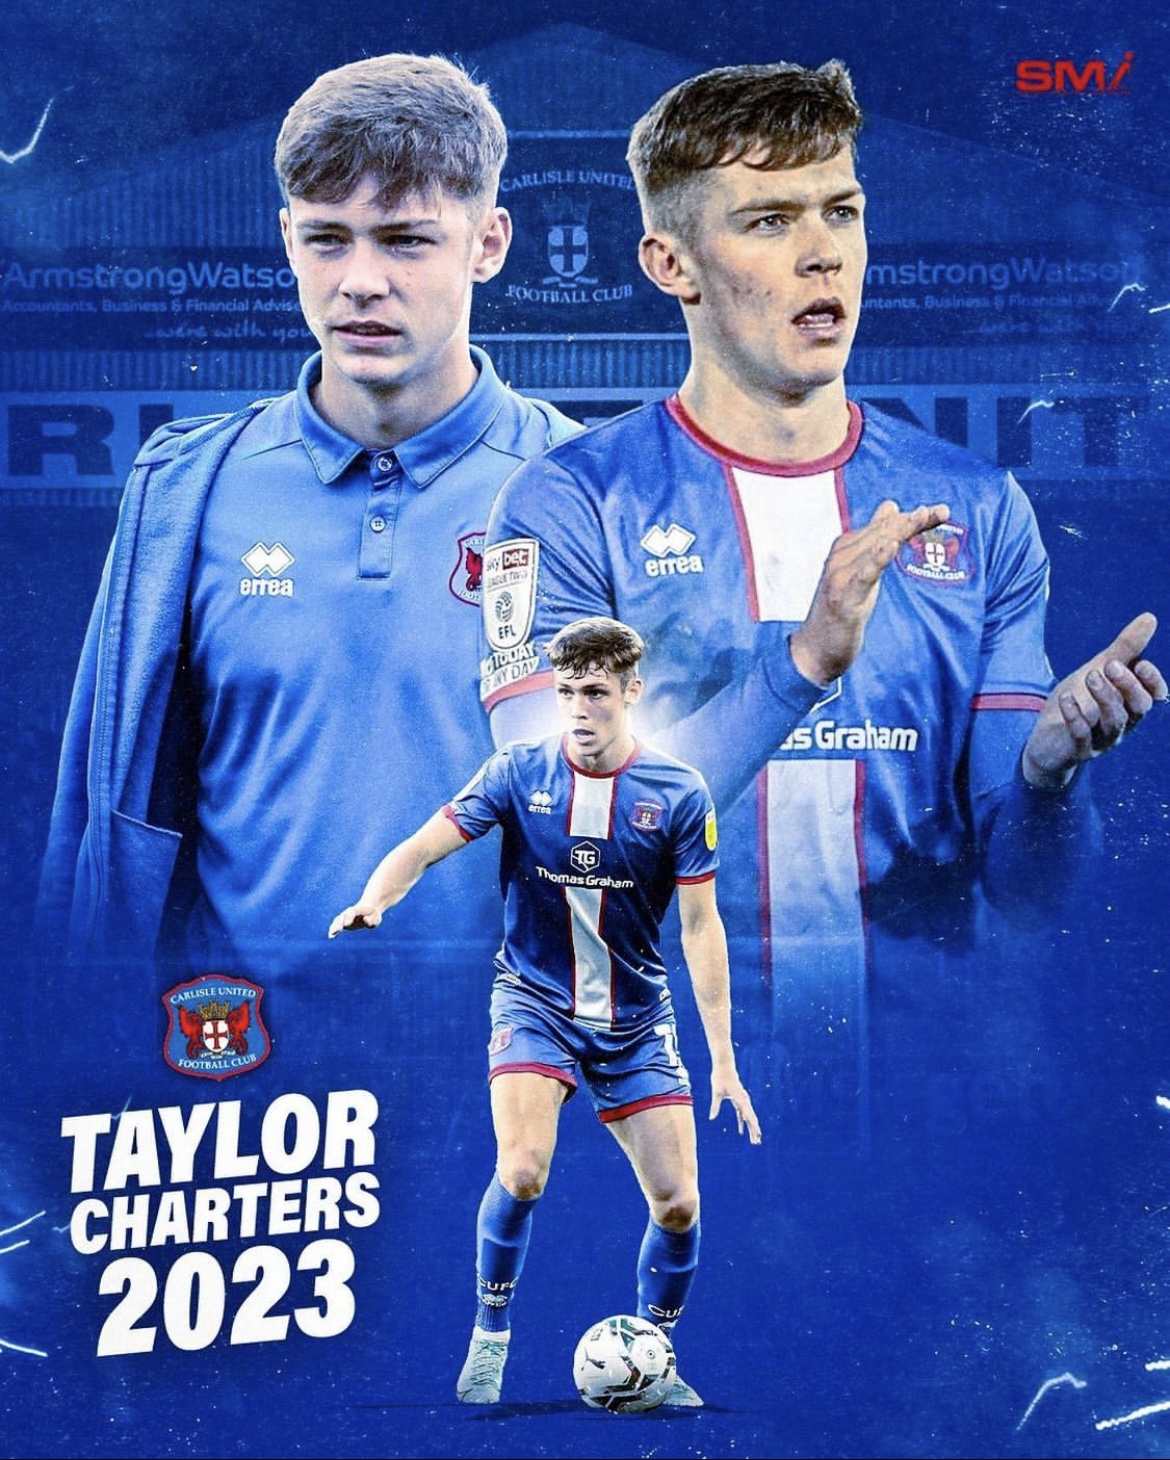 Taylor charters new deal